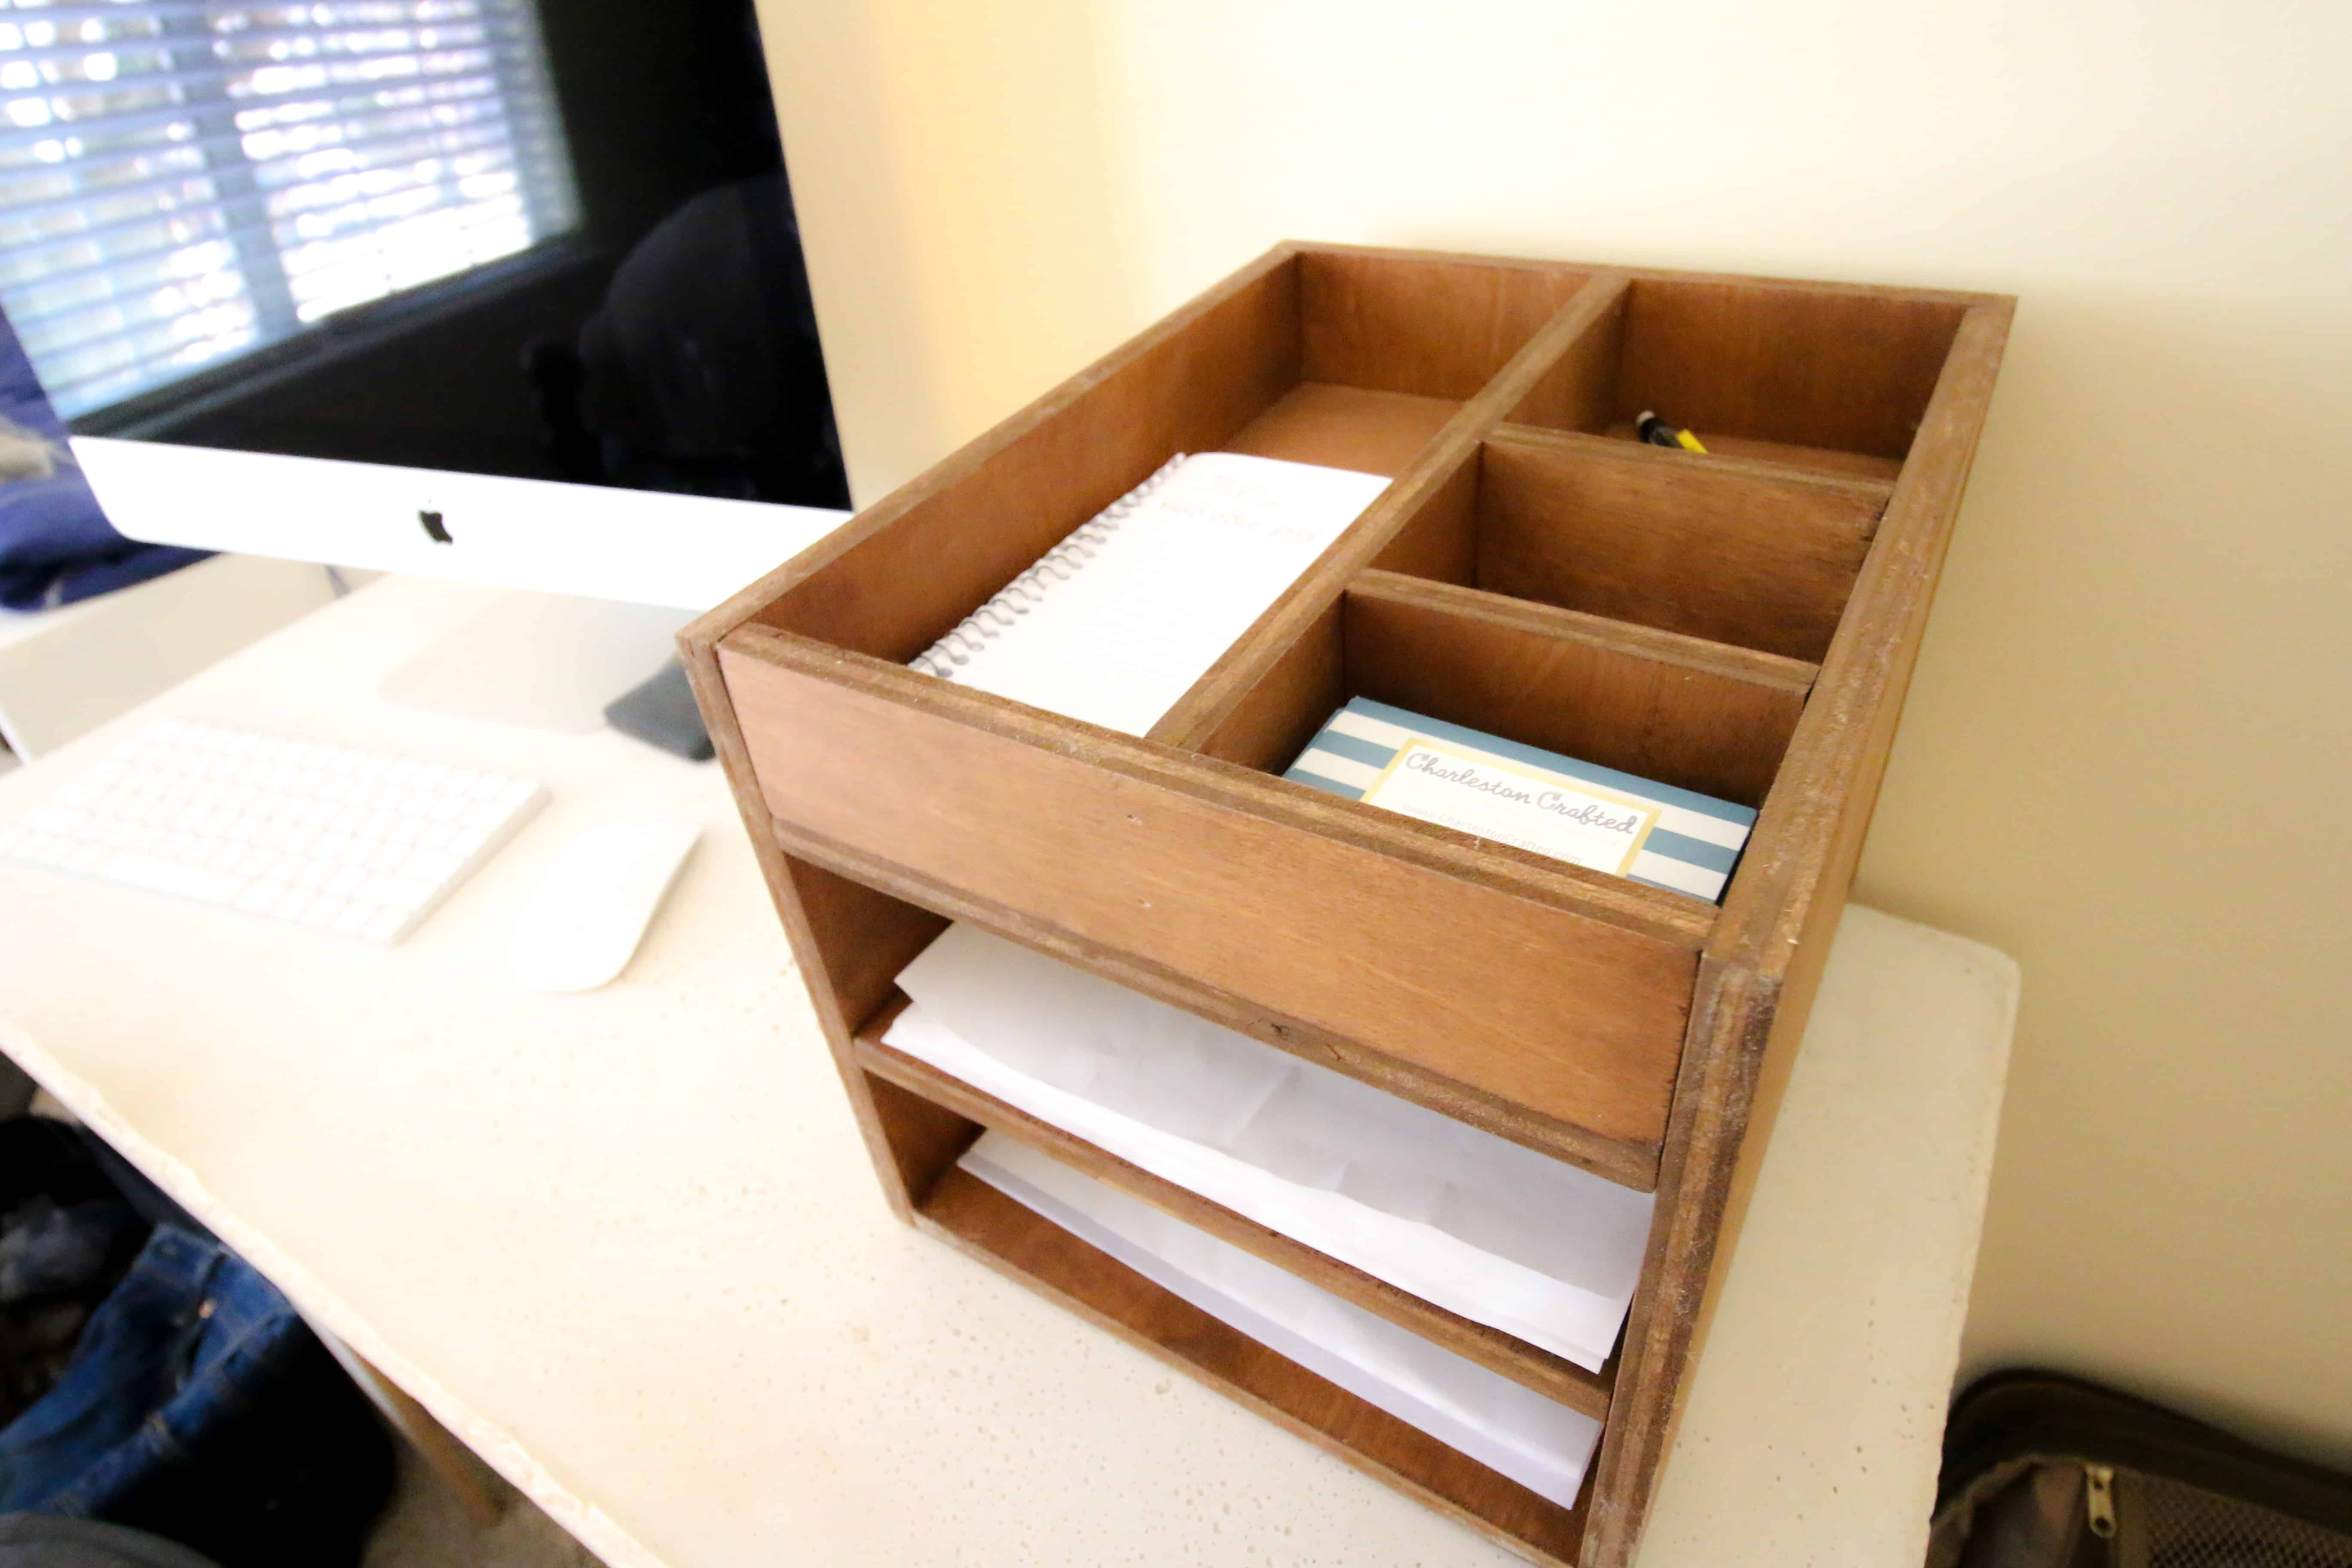 Woodworking plans for a desk organizer